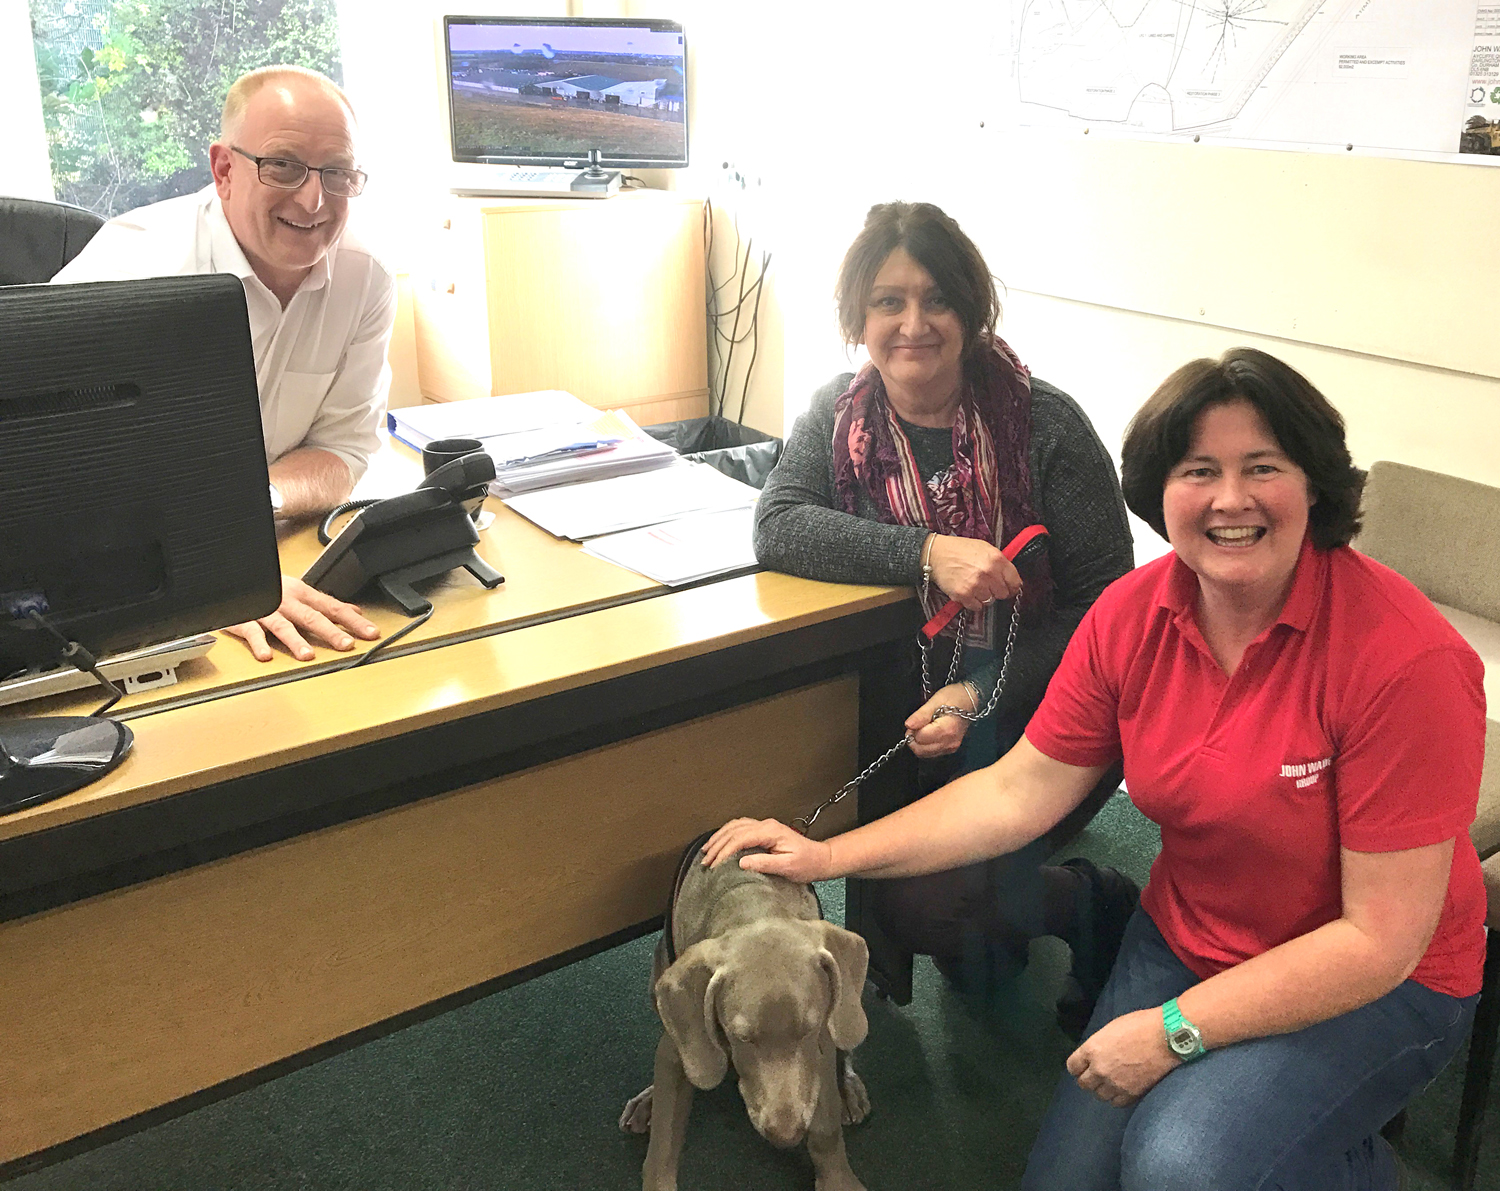 Aycliffe Quarry Staff Stop Work to Find Lost Dog